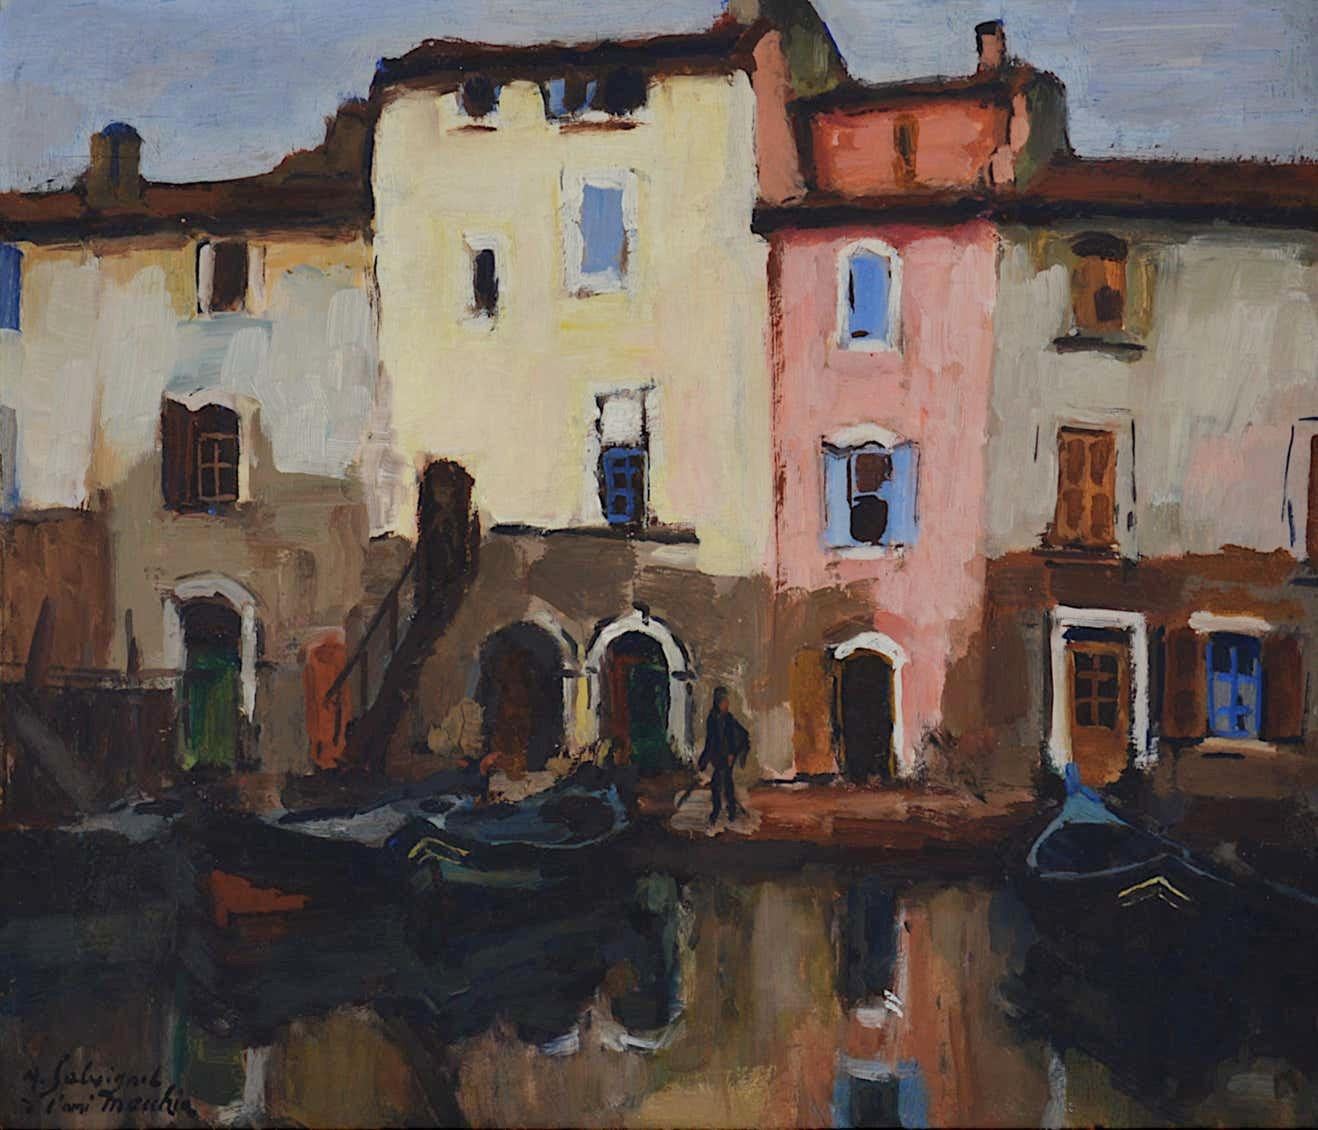 Alfred SALVIGNOL, Port of Villefranche-sur-Mer, Oil on panel, Beg. 20th C. - Painting by Alfred Savignol